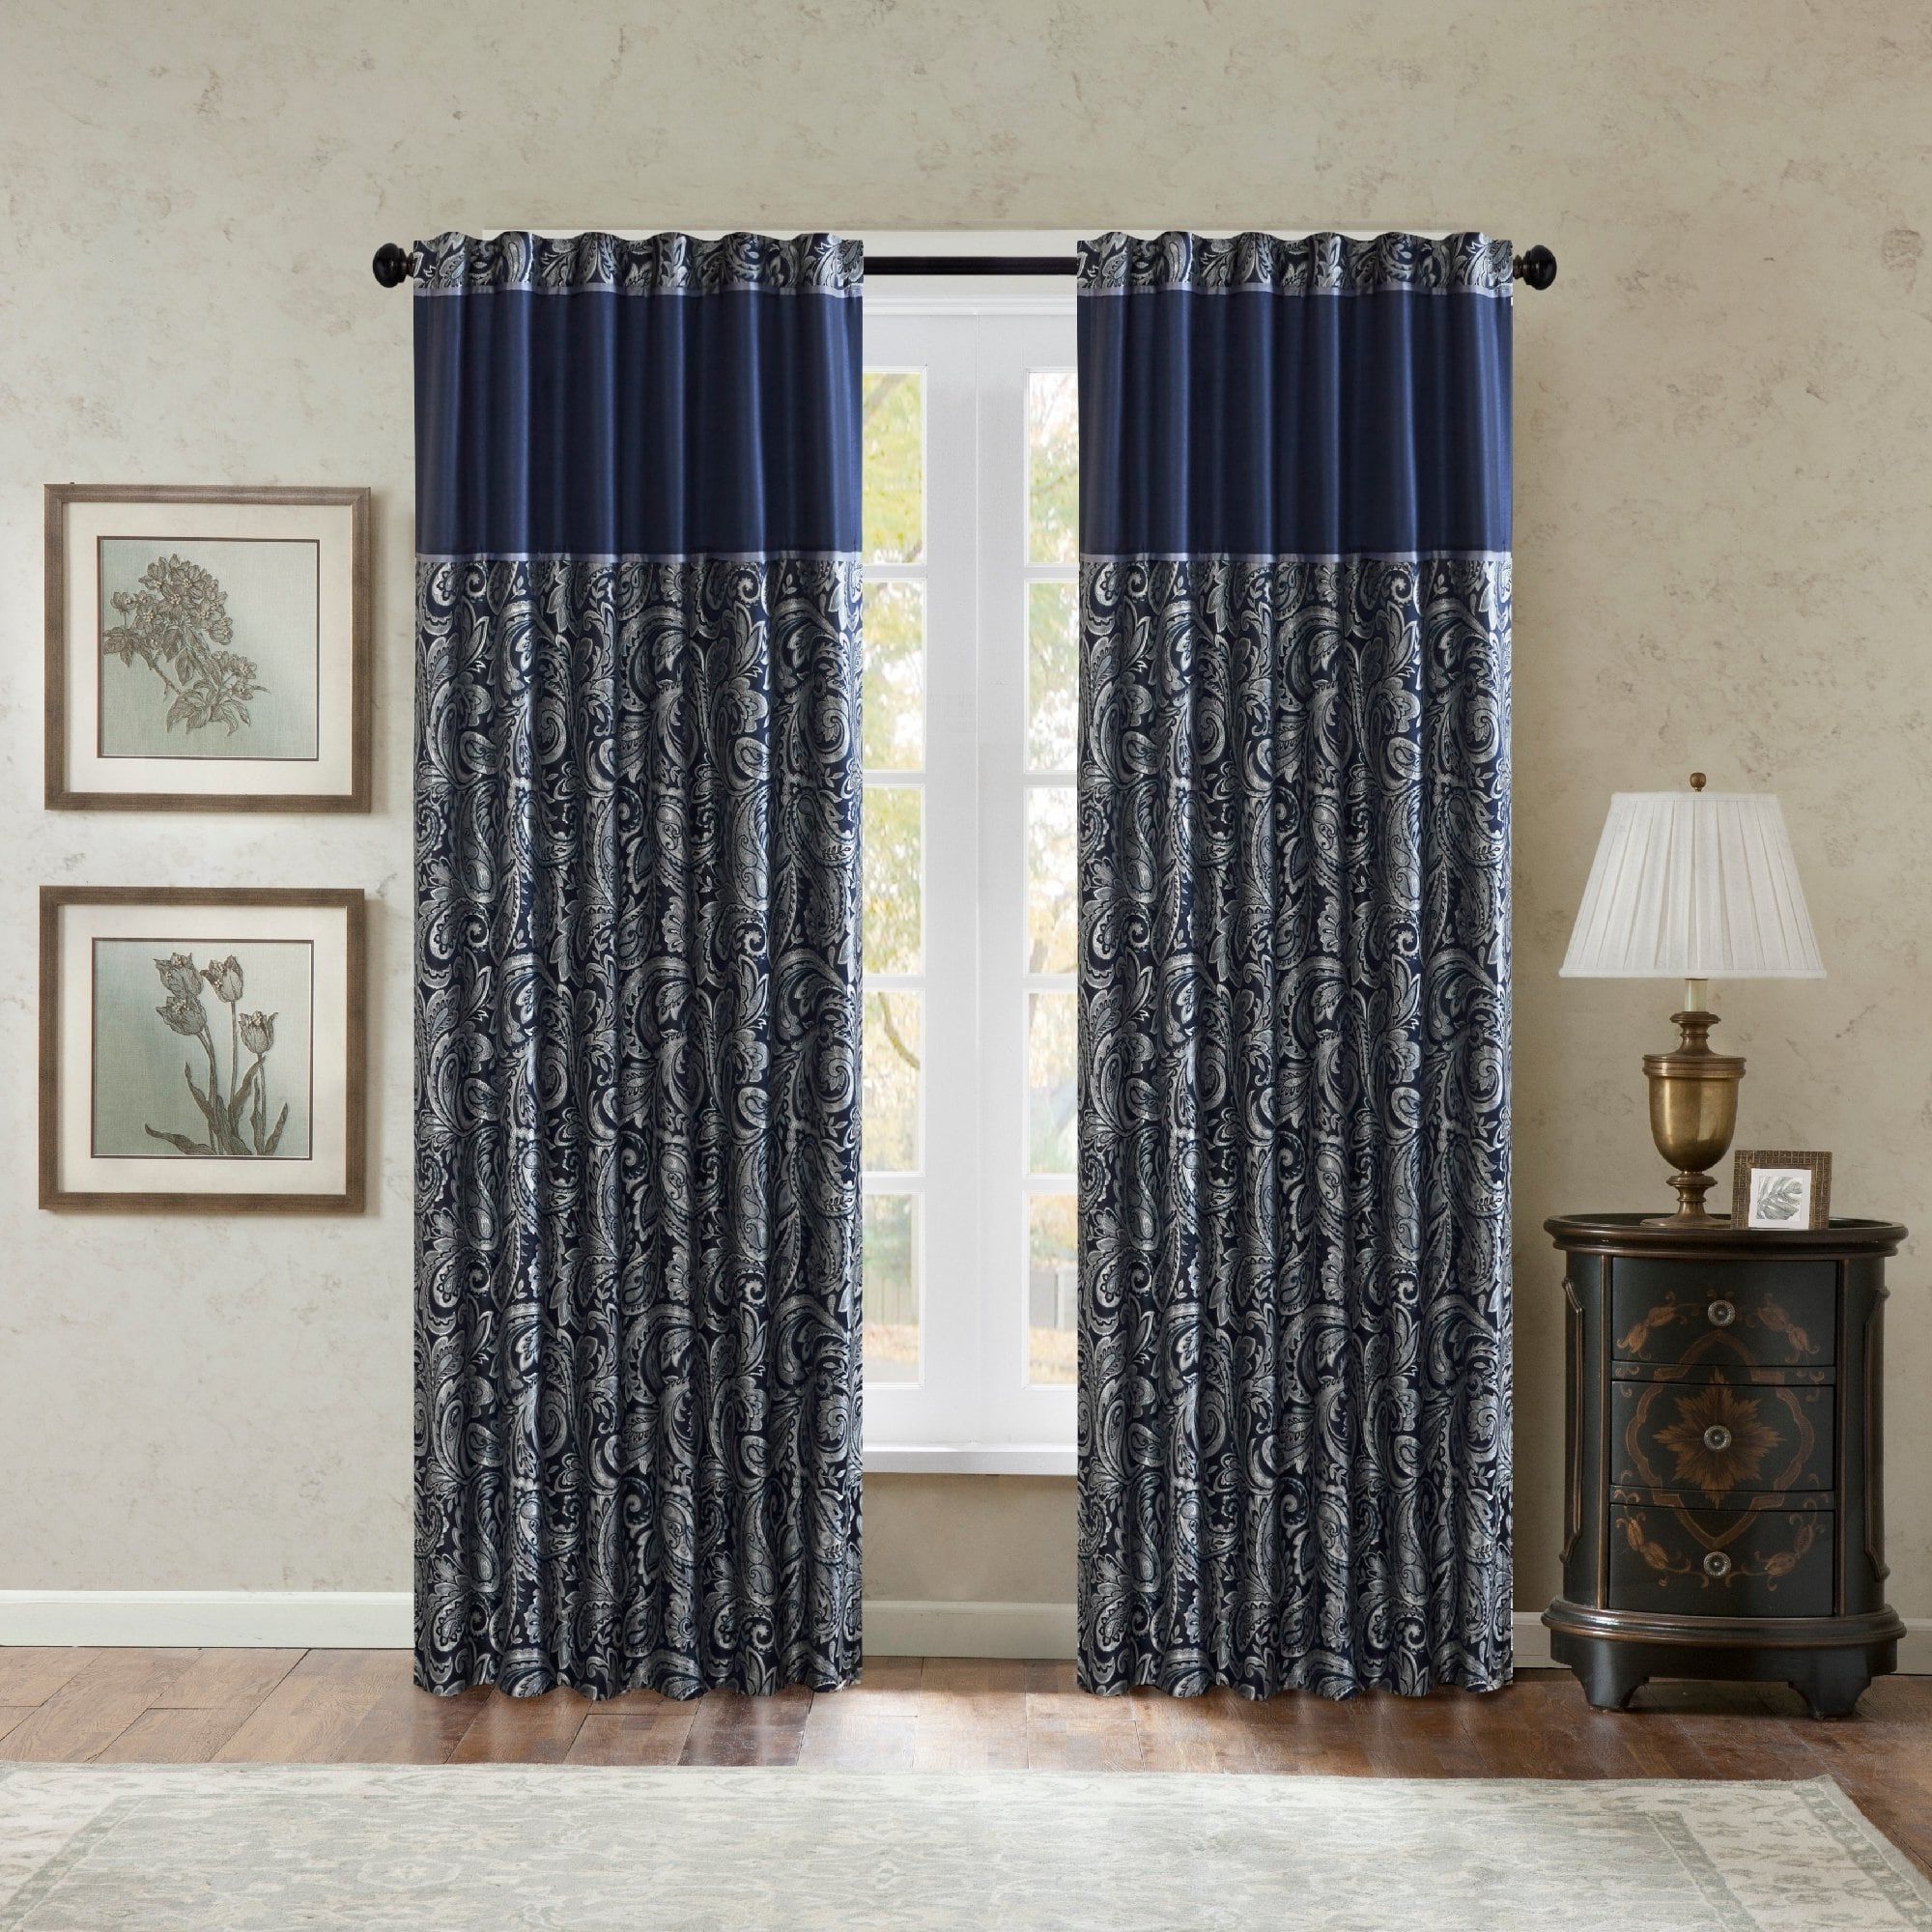 Madison Park Whitman Curtain Panel Pair (50"w X 84"l – Blue Throughout Most Up To Date Whitman Curtain Panel Pairs (View 6 of 20)